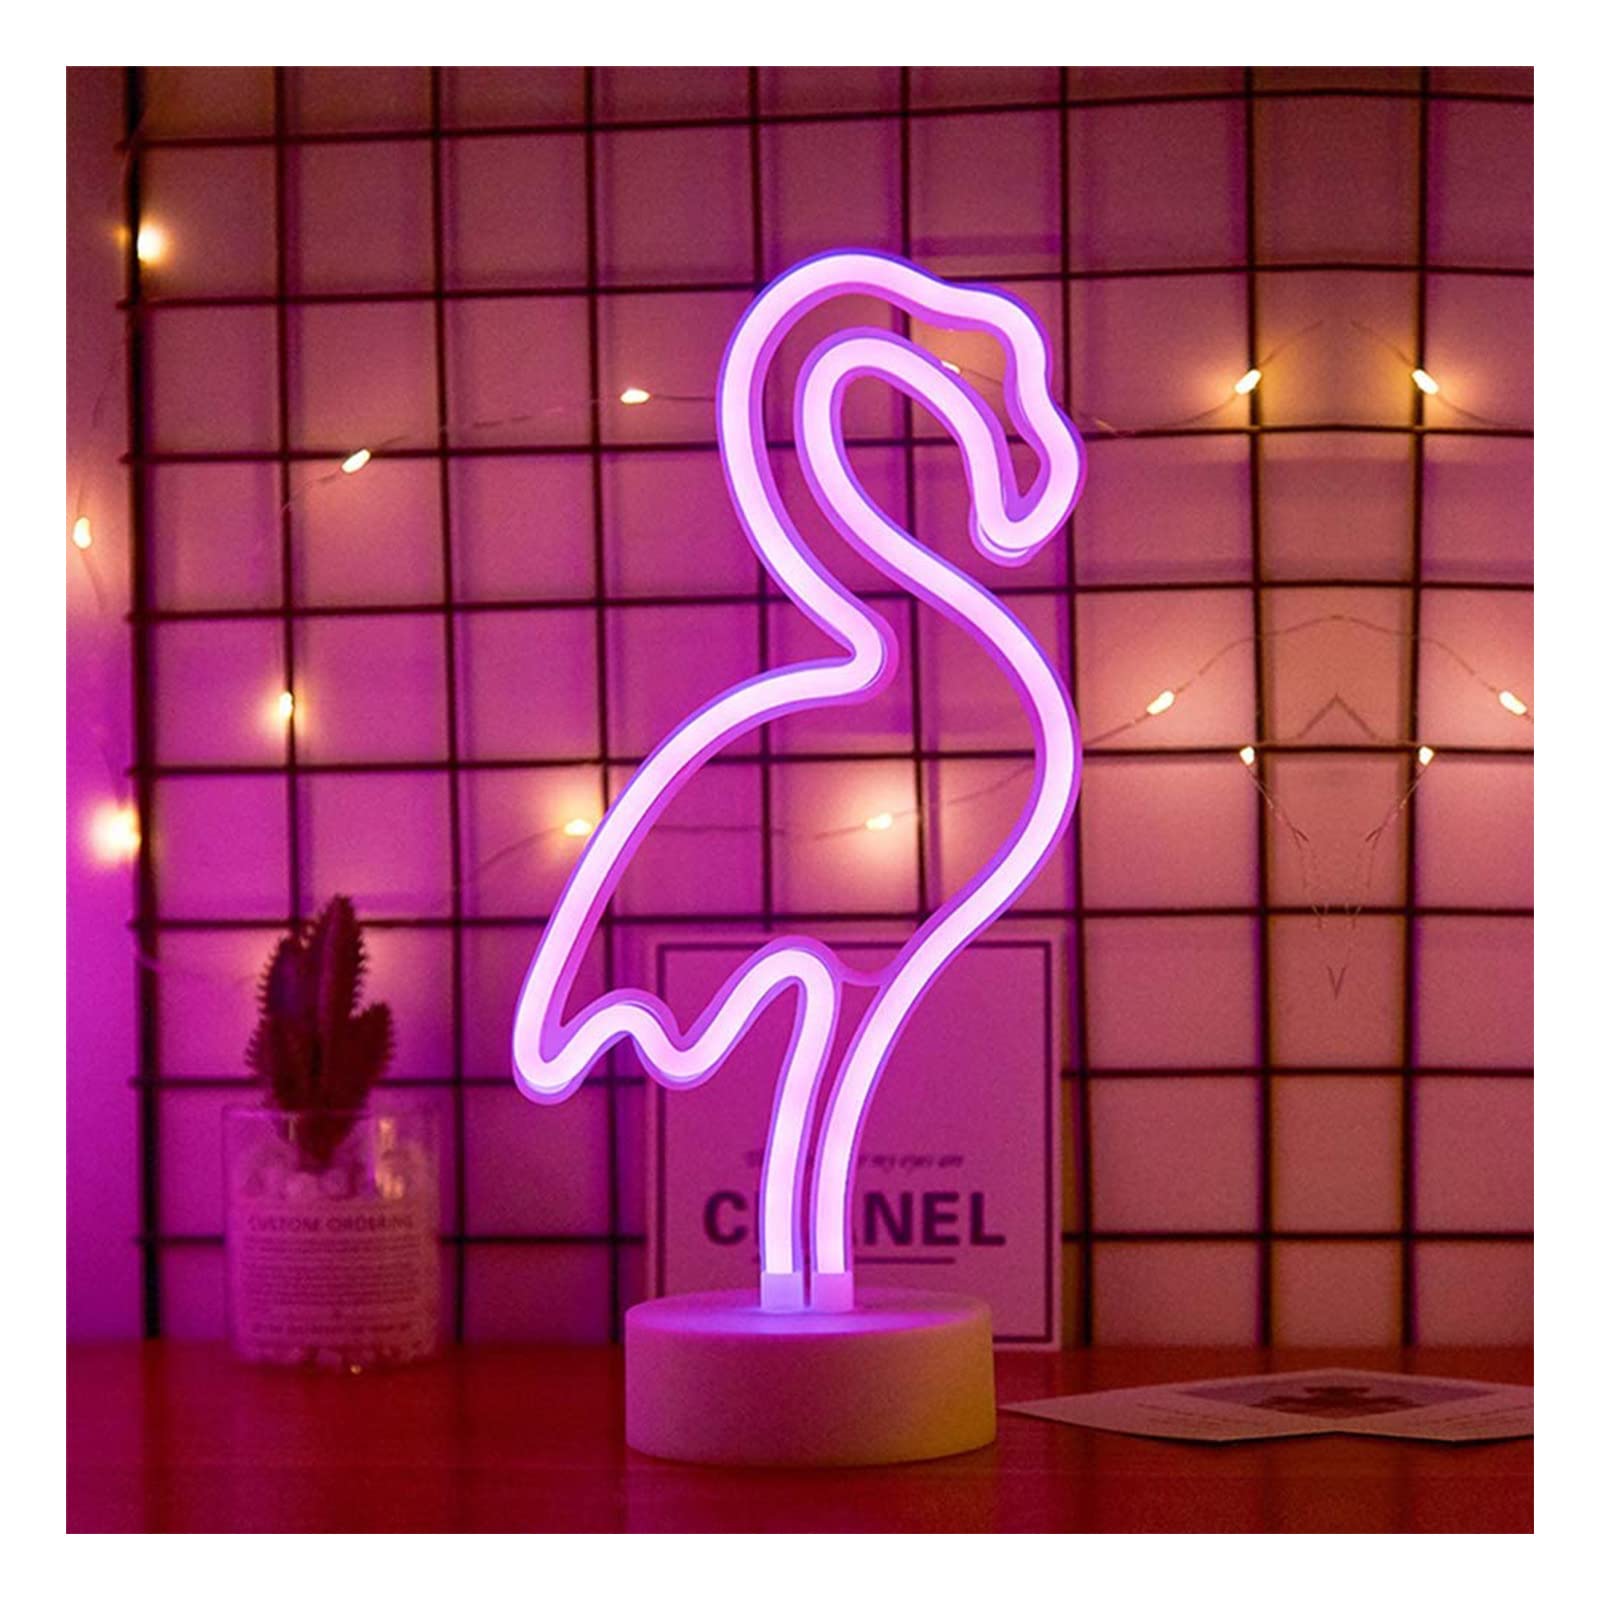 ENUOLI LED Flamingo Neon Light Signs Neon Signs Lamps Flamingo Neon Lights Room Decor Battery & USB Operation Night Lights with Pedestal Pink Neon Signs Light up Bar Bedroom Party Christmas